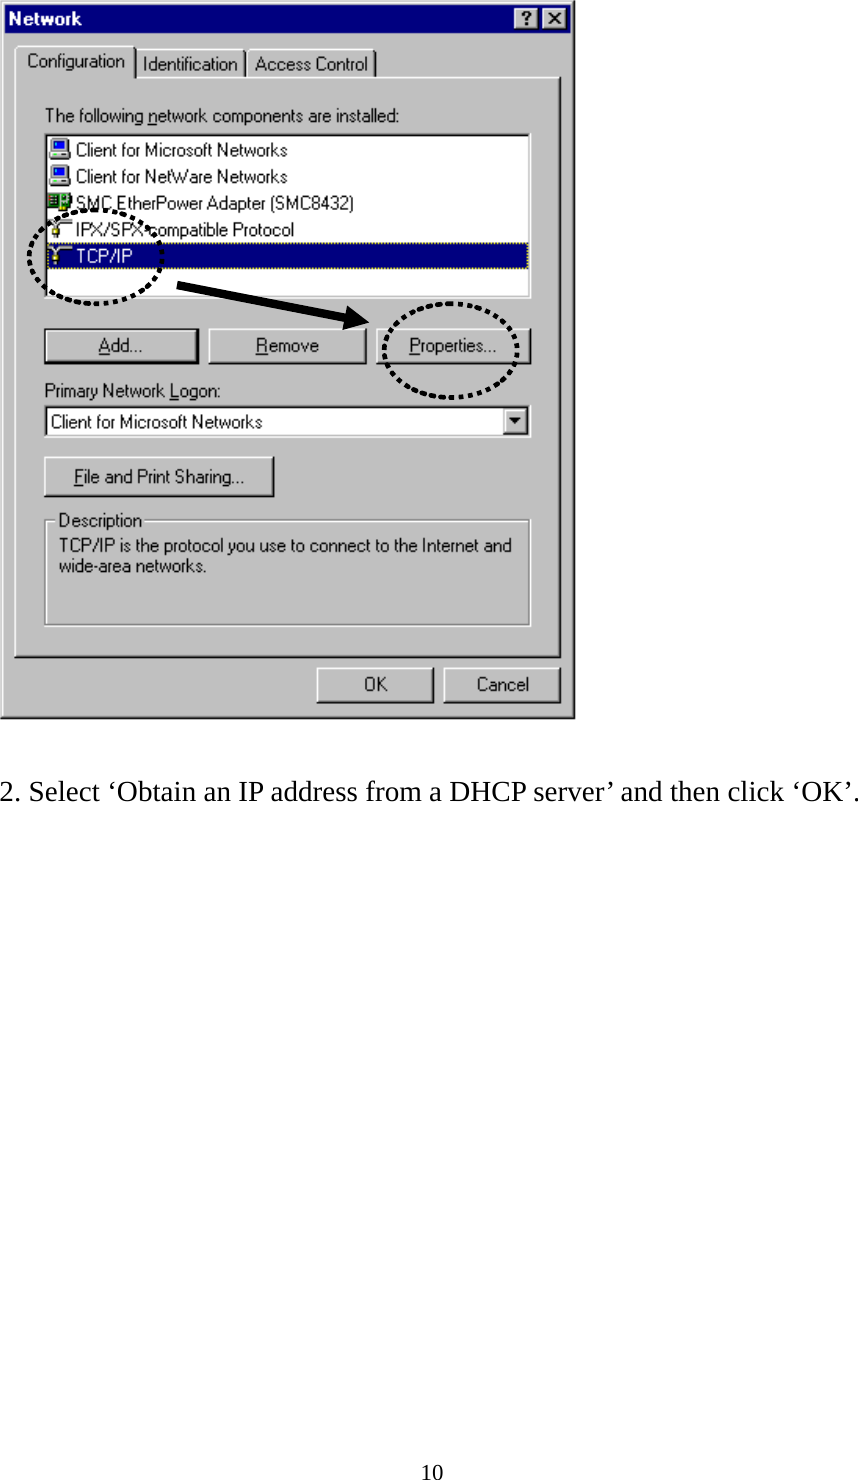 10   2. Select ‘Obtain an IP address from a DHCP server’ and then click ‘OK’.    